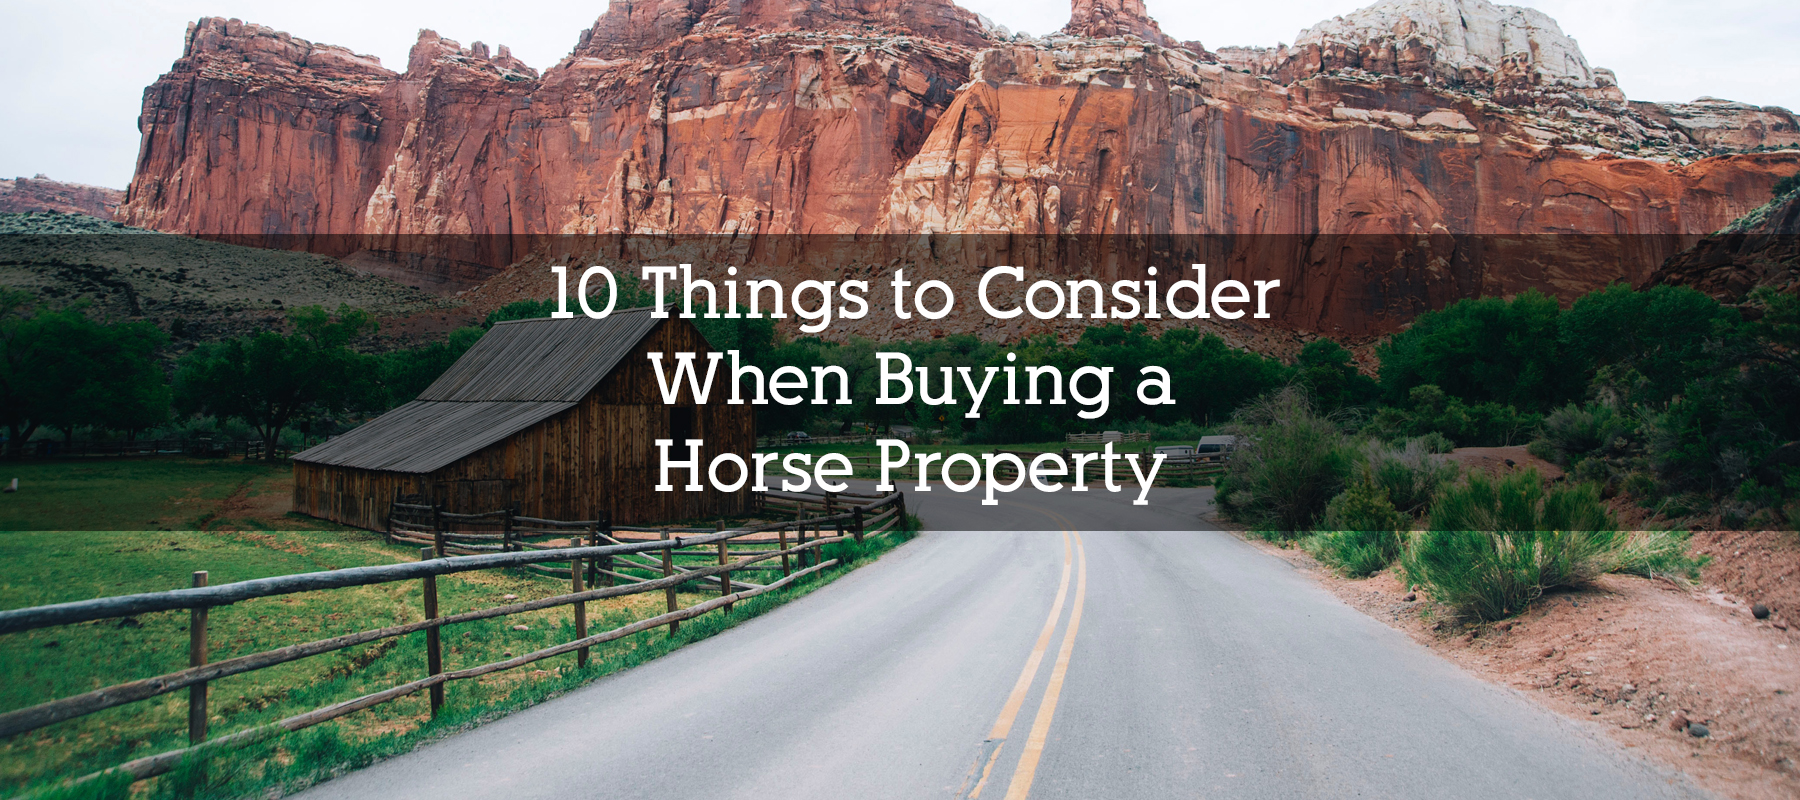 10 Things to Consider When Buying a Horse Property